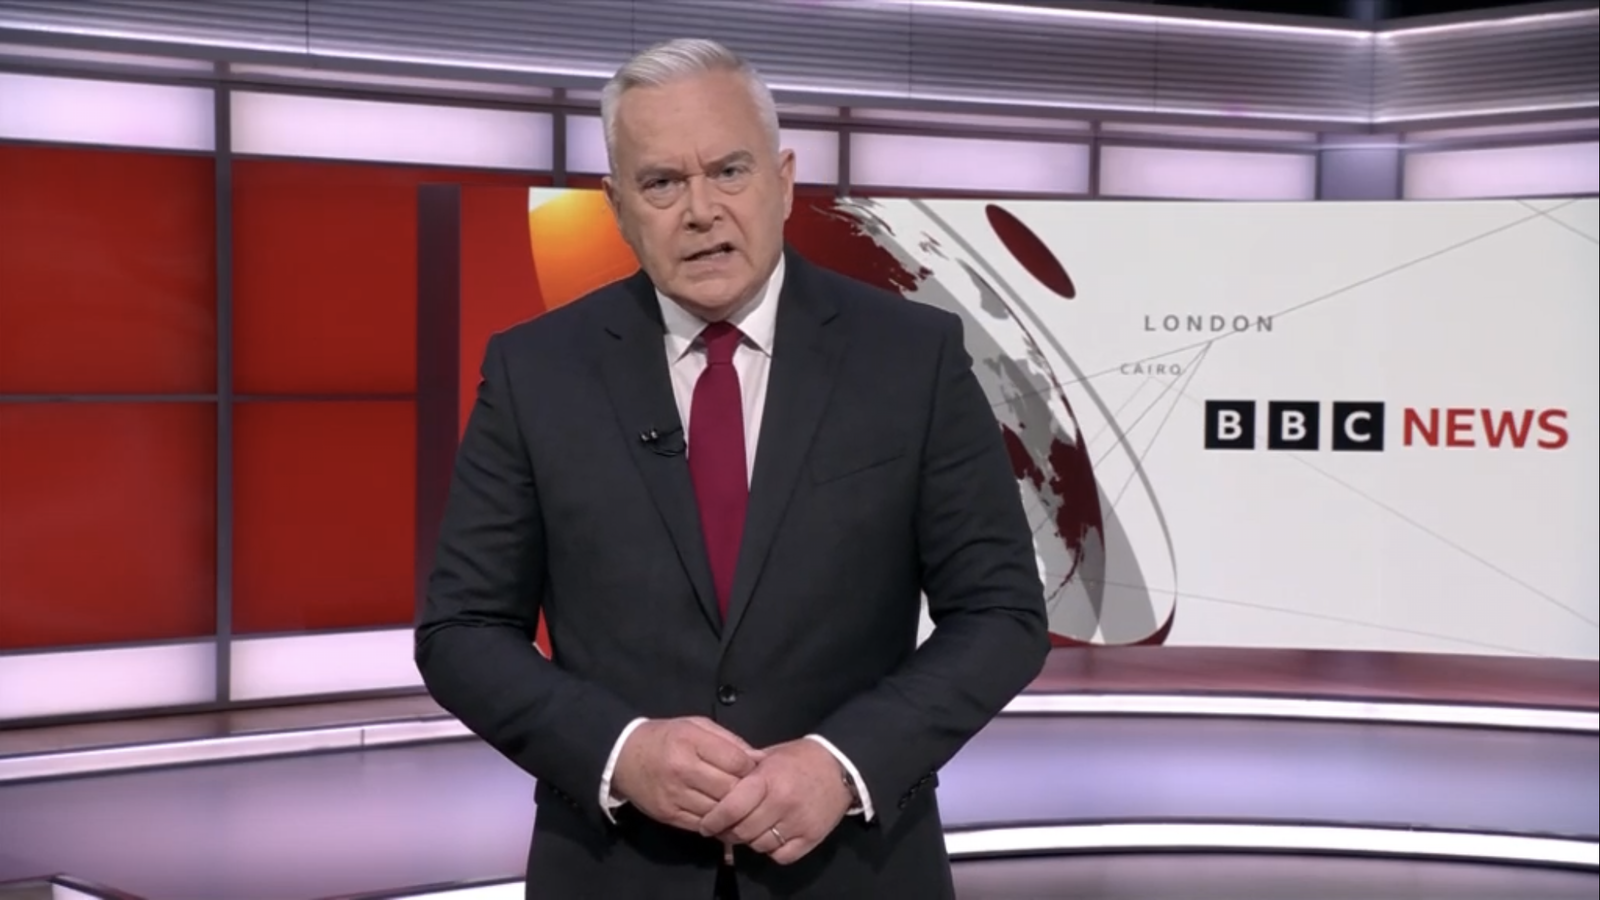 Huw Edwards' friend says claims against 'very vulnerable' presenter are 'against everything I know about the man'